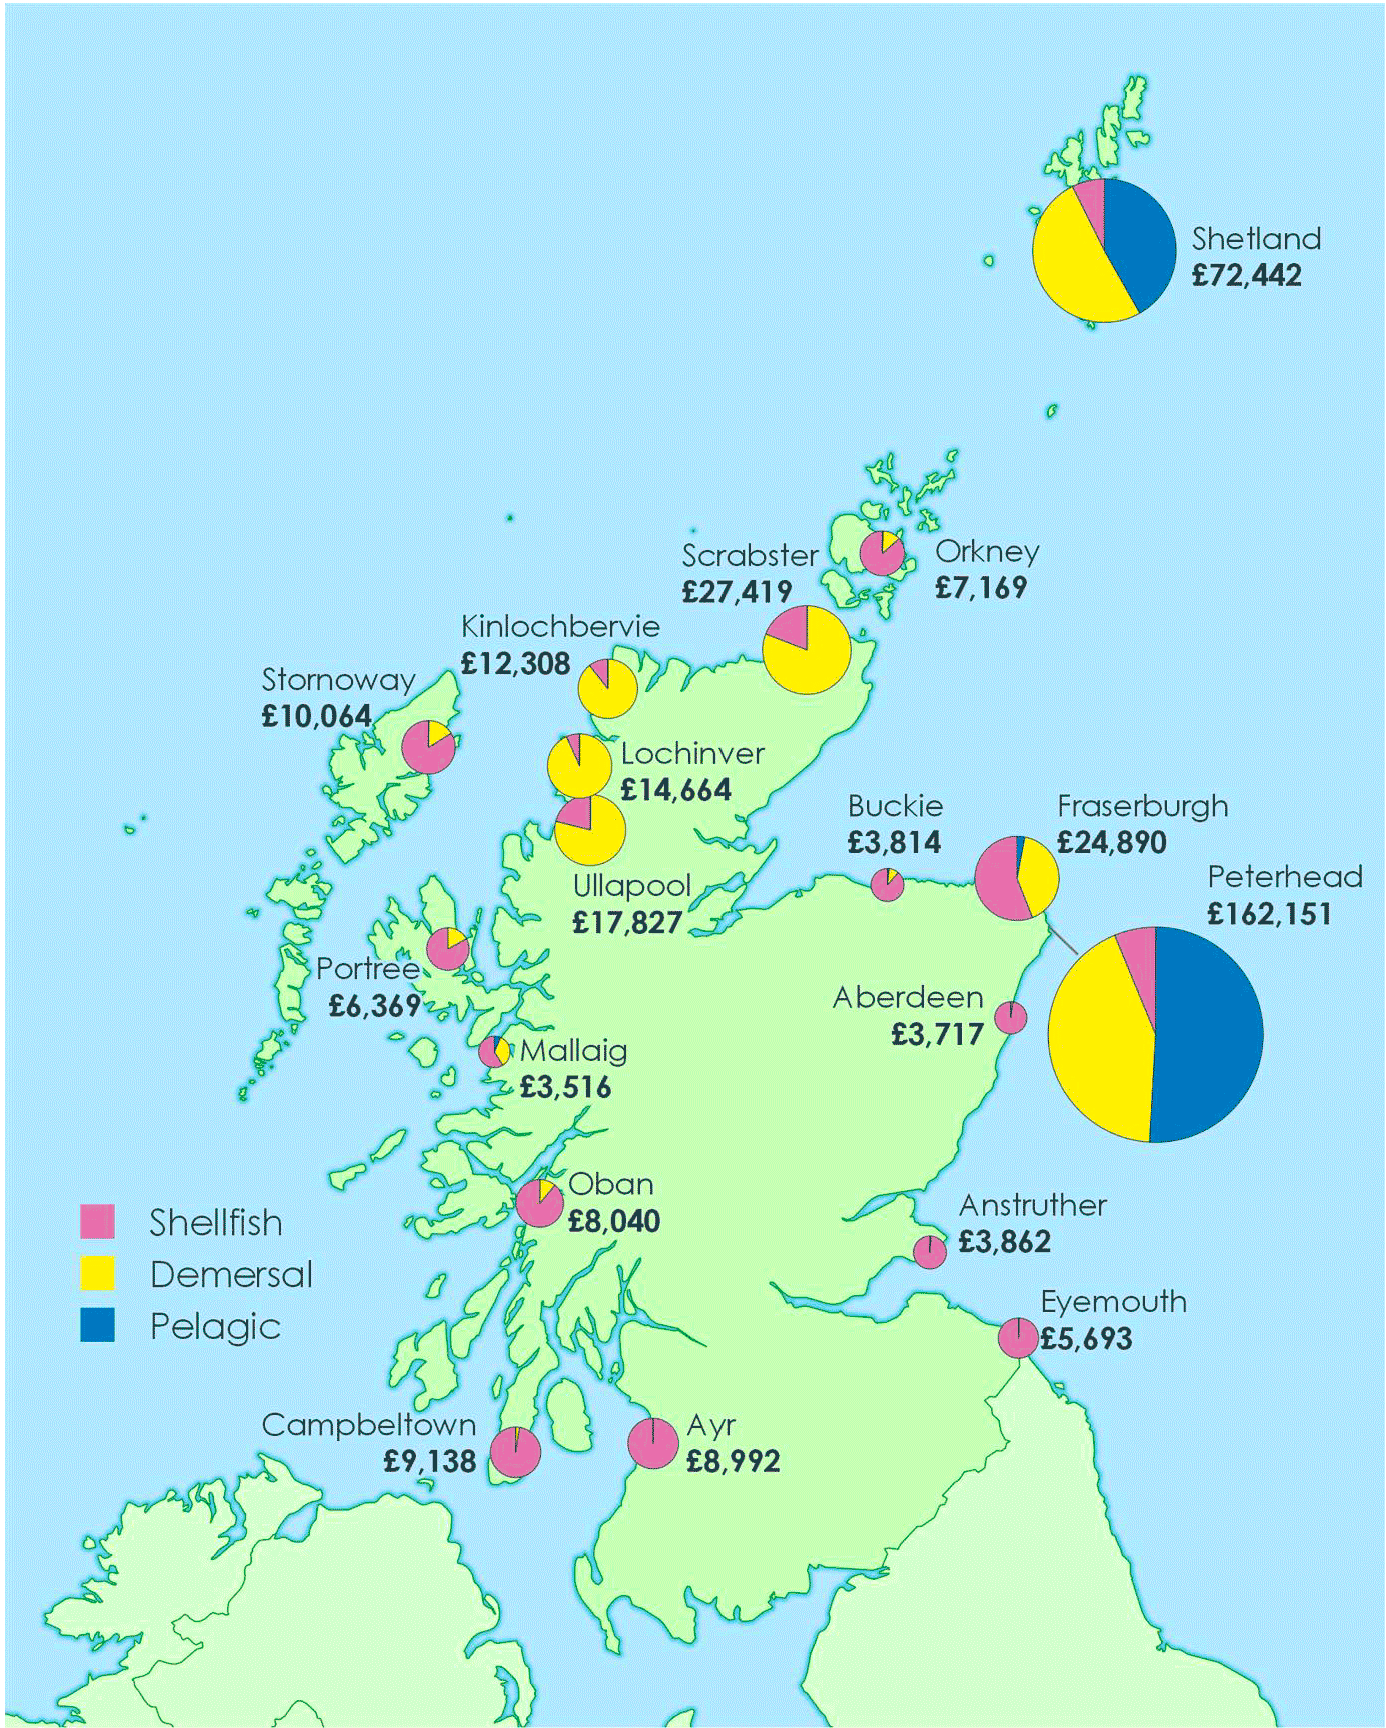 Value of landings (£’thousands) into Scotland by all vessels by district by species type in 2020